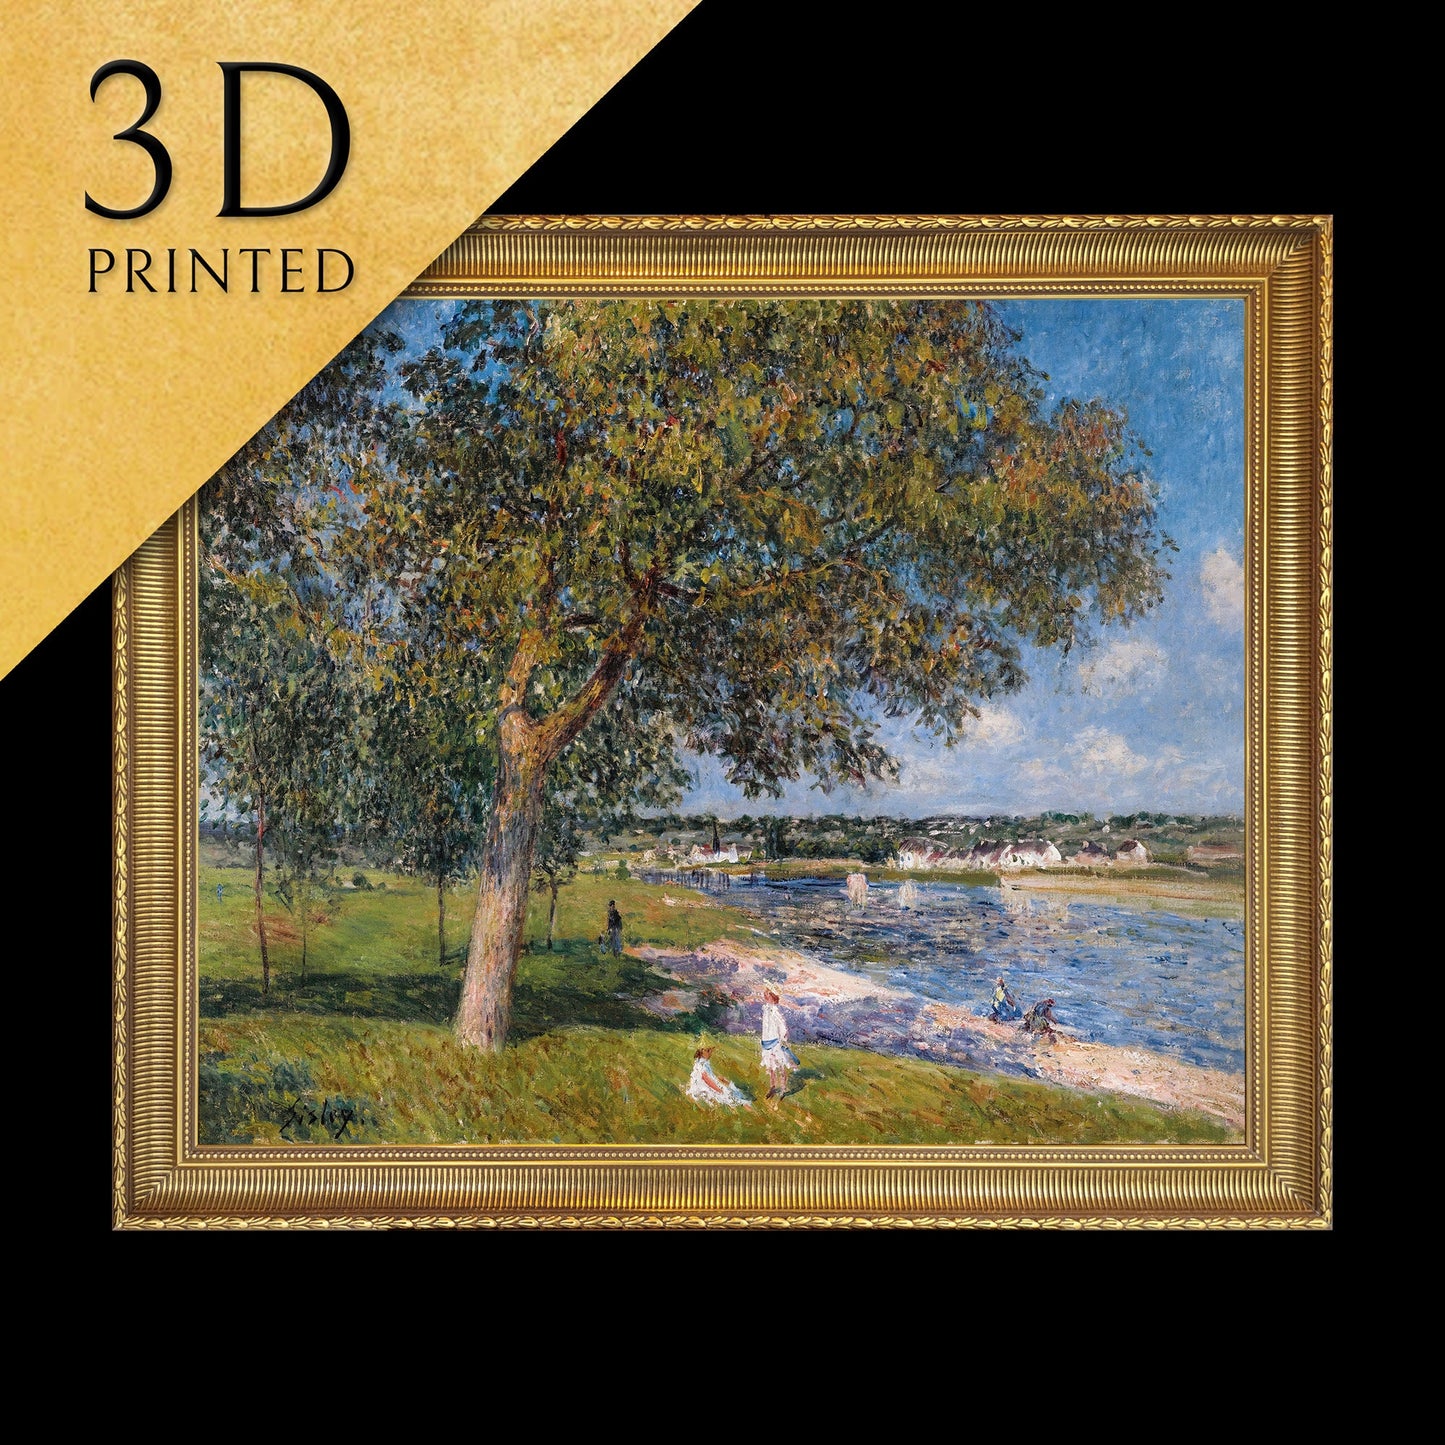 Un Noyer Dans La Prairie De Thomery by Alfred Sisley, 3d Printed with texture and brush strokes looks like original oil-painting, code:559